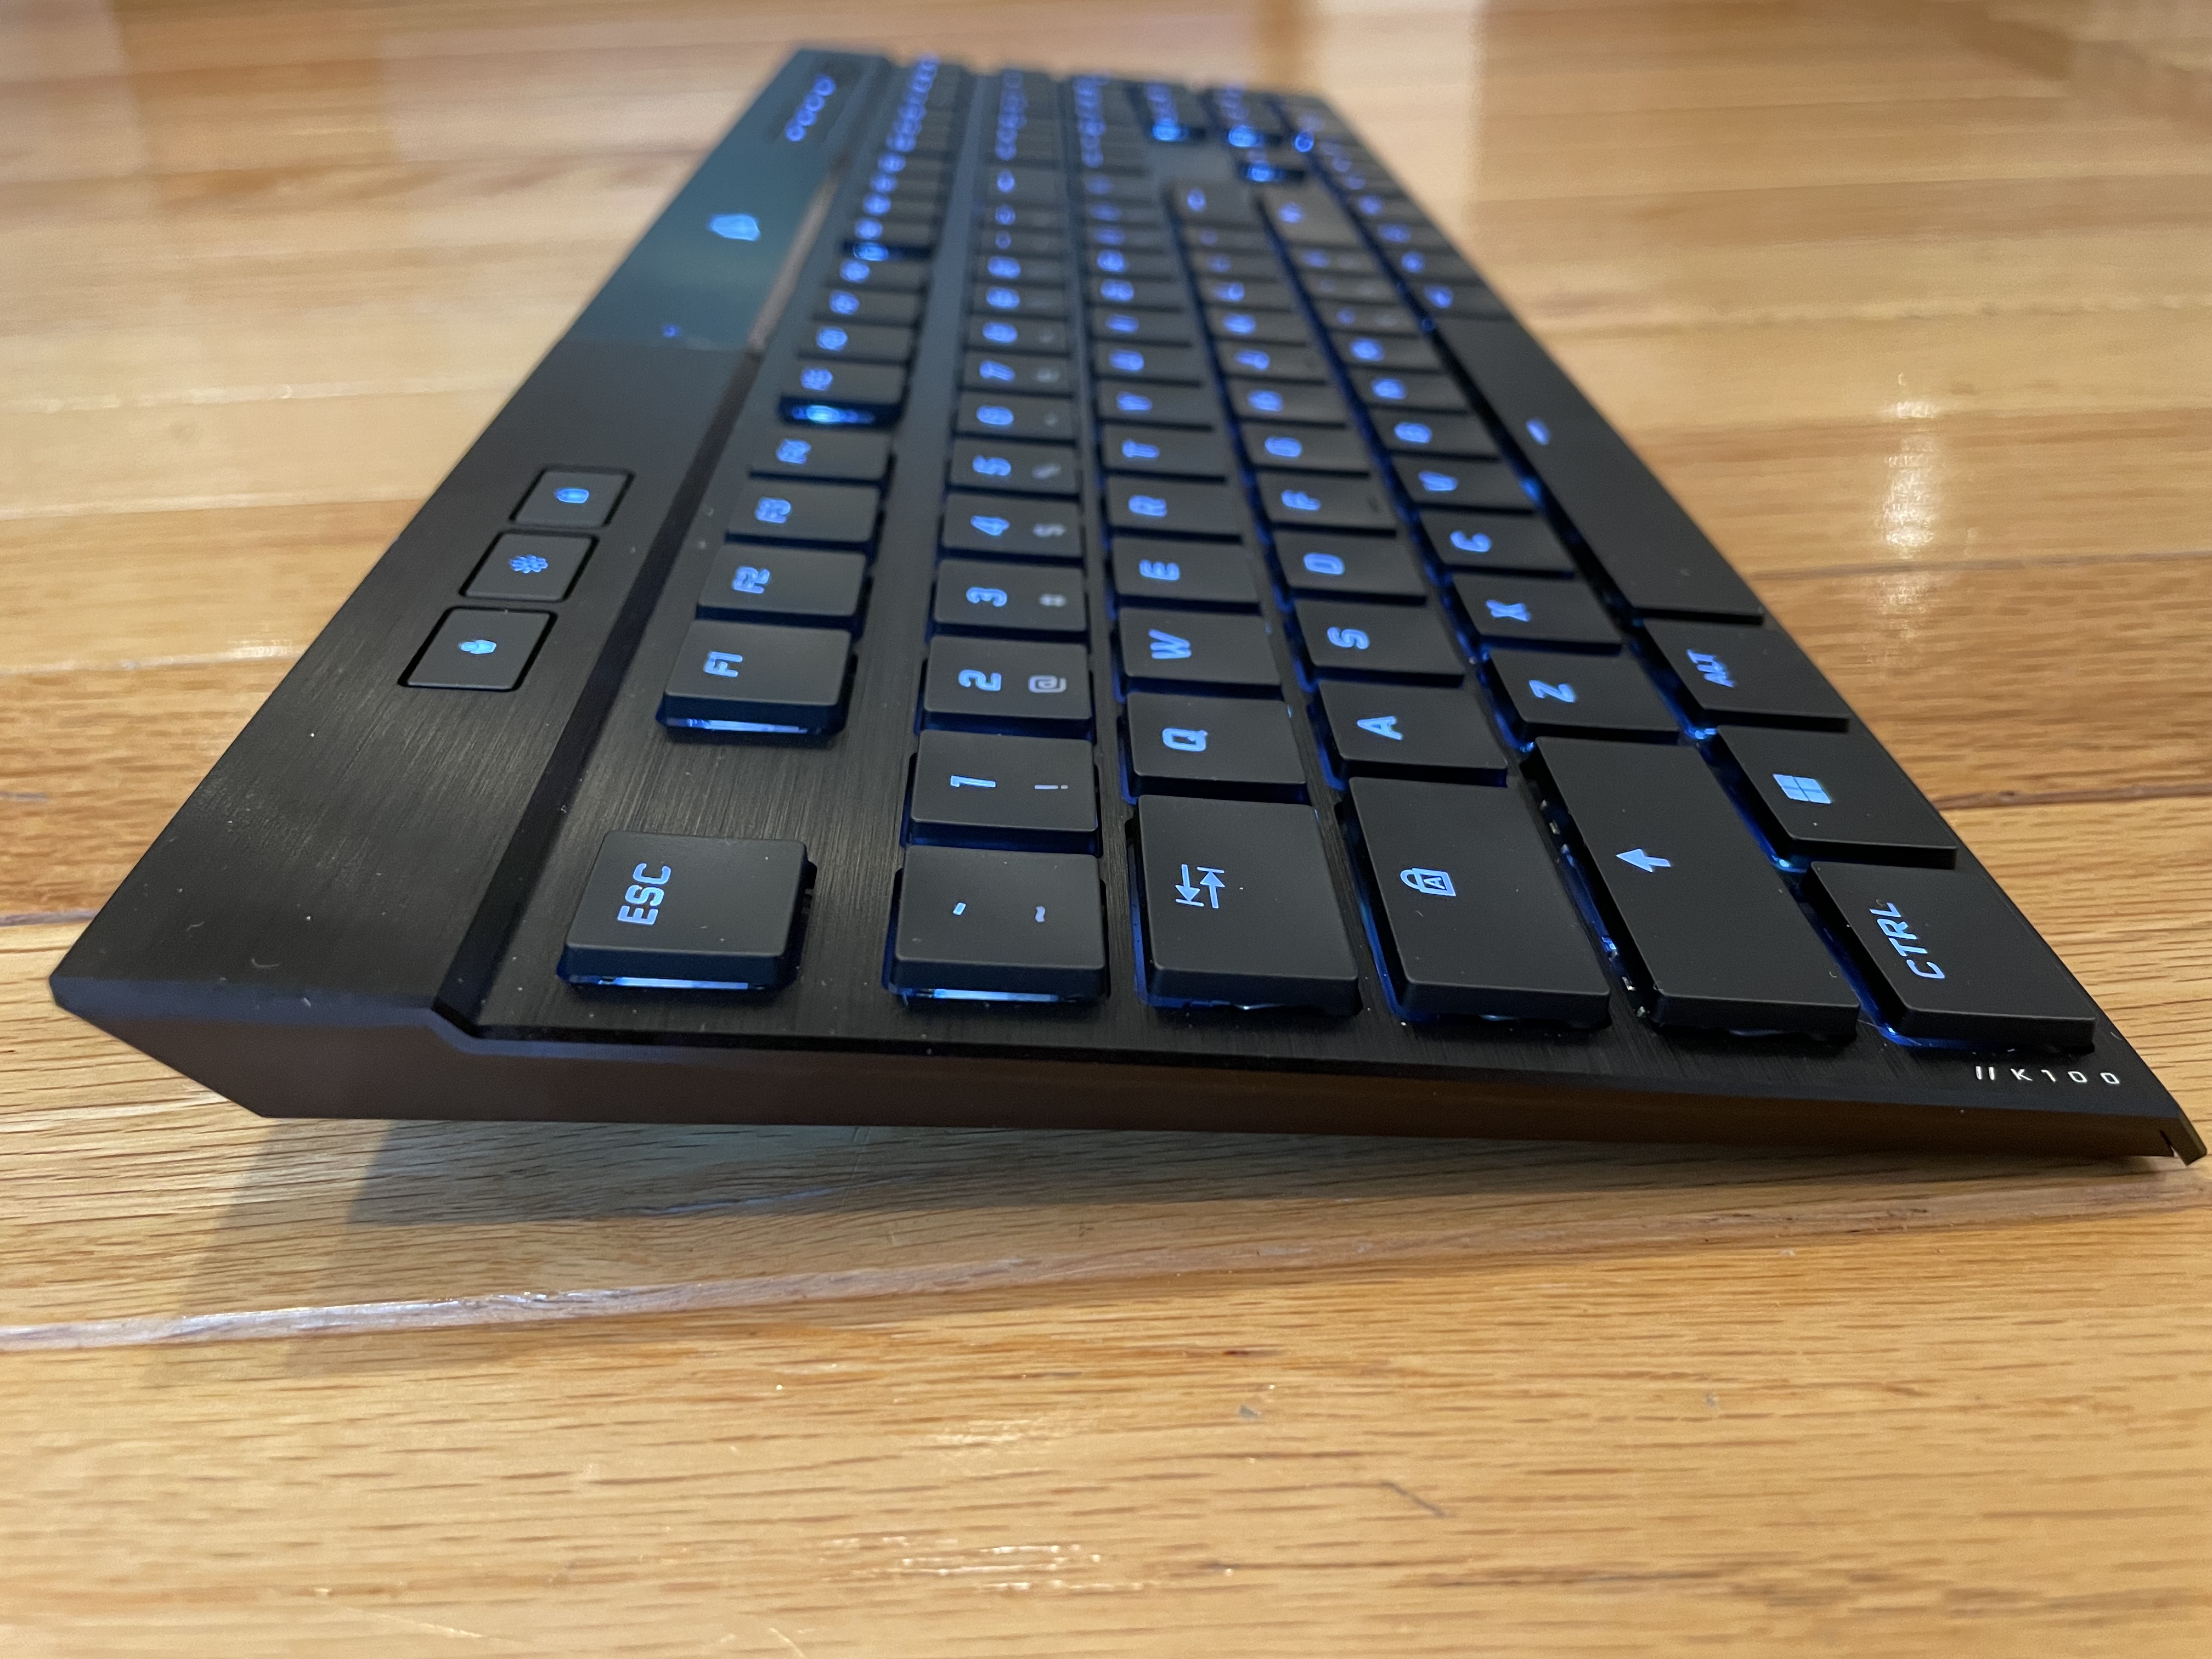 Hands-On: Corsair's iCue Link Brings USB-Like Connectivity to